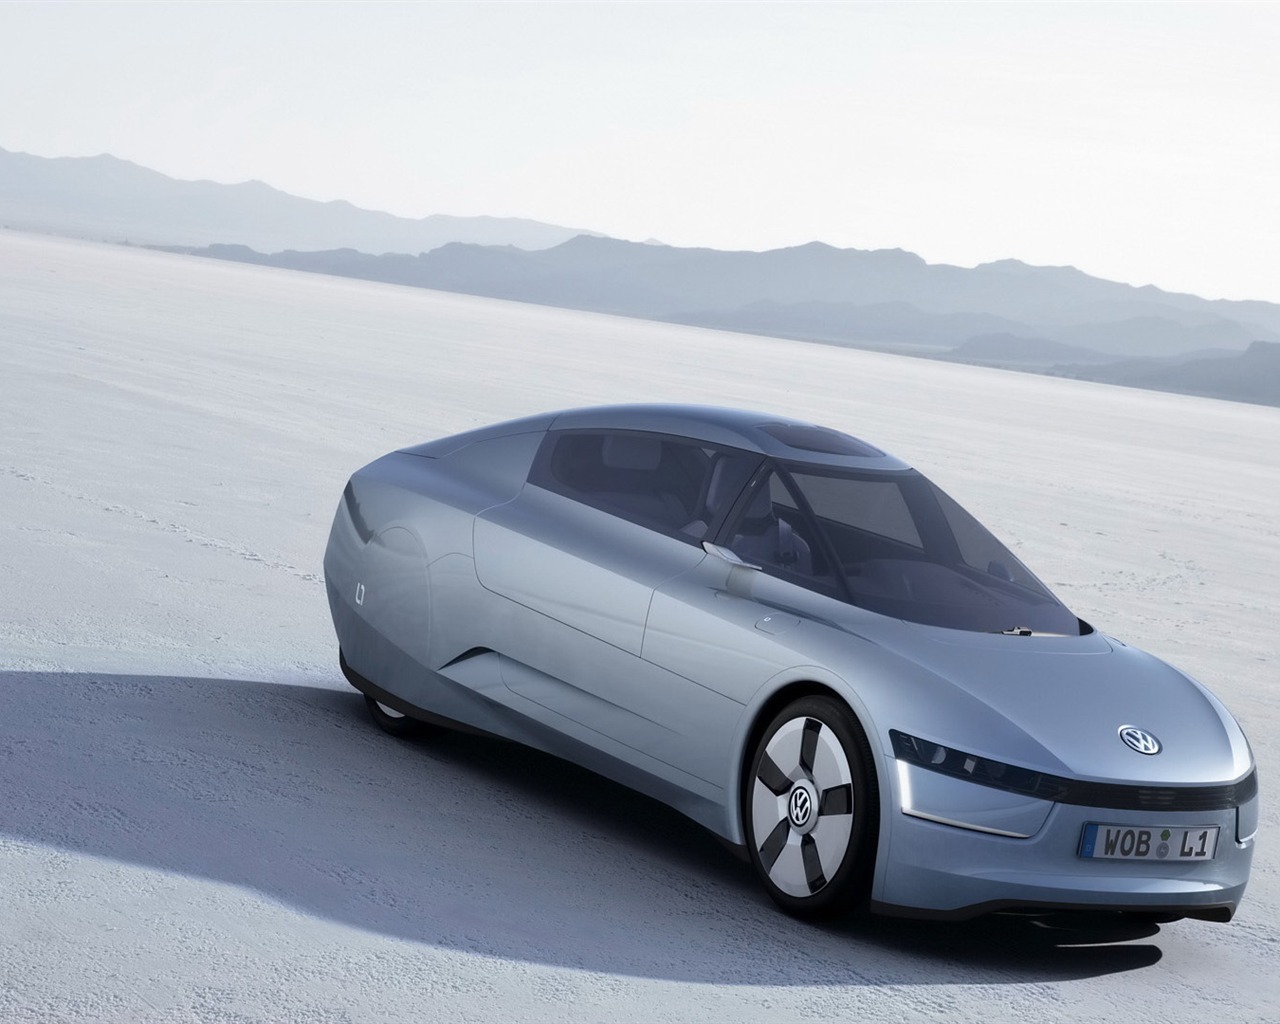 Volkswagen L1 Tapety Concept Car #7 - 1280x1024